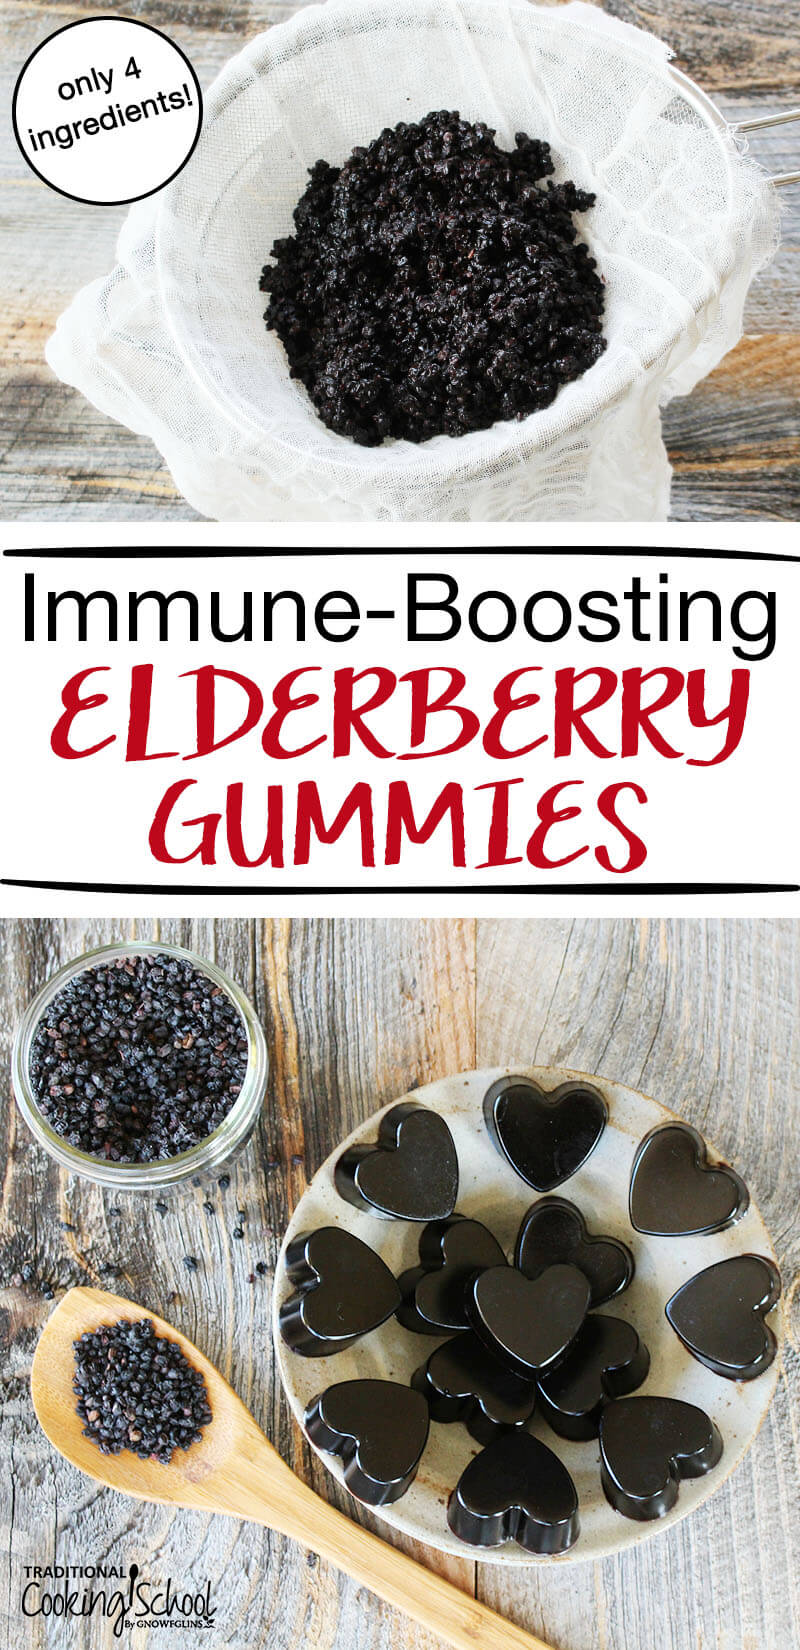 photo collage of the process of making elderberry gummies with text overlay: "Immune-Boosting Elderberry Gummies"